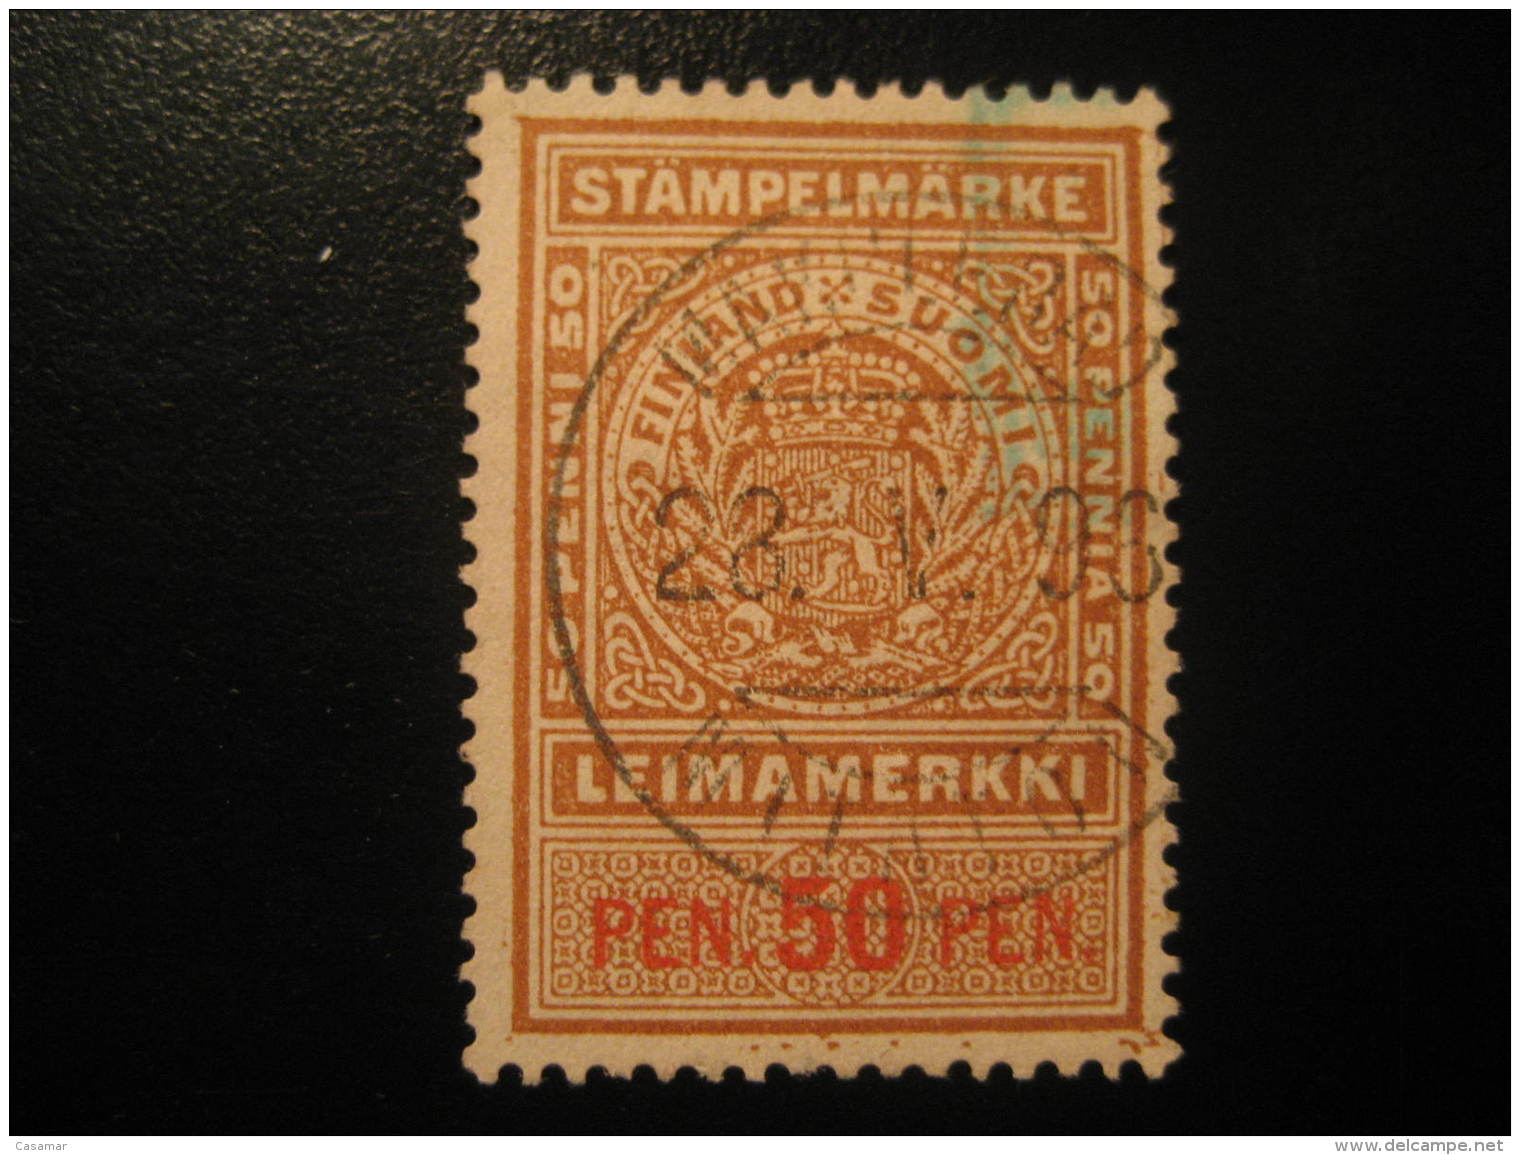 1896 STAMPELMARKE 50 Pen Revenue Fiscal Tax Postage Due Official FINLAND - Fiscaux